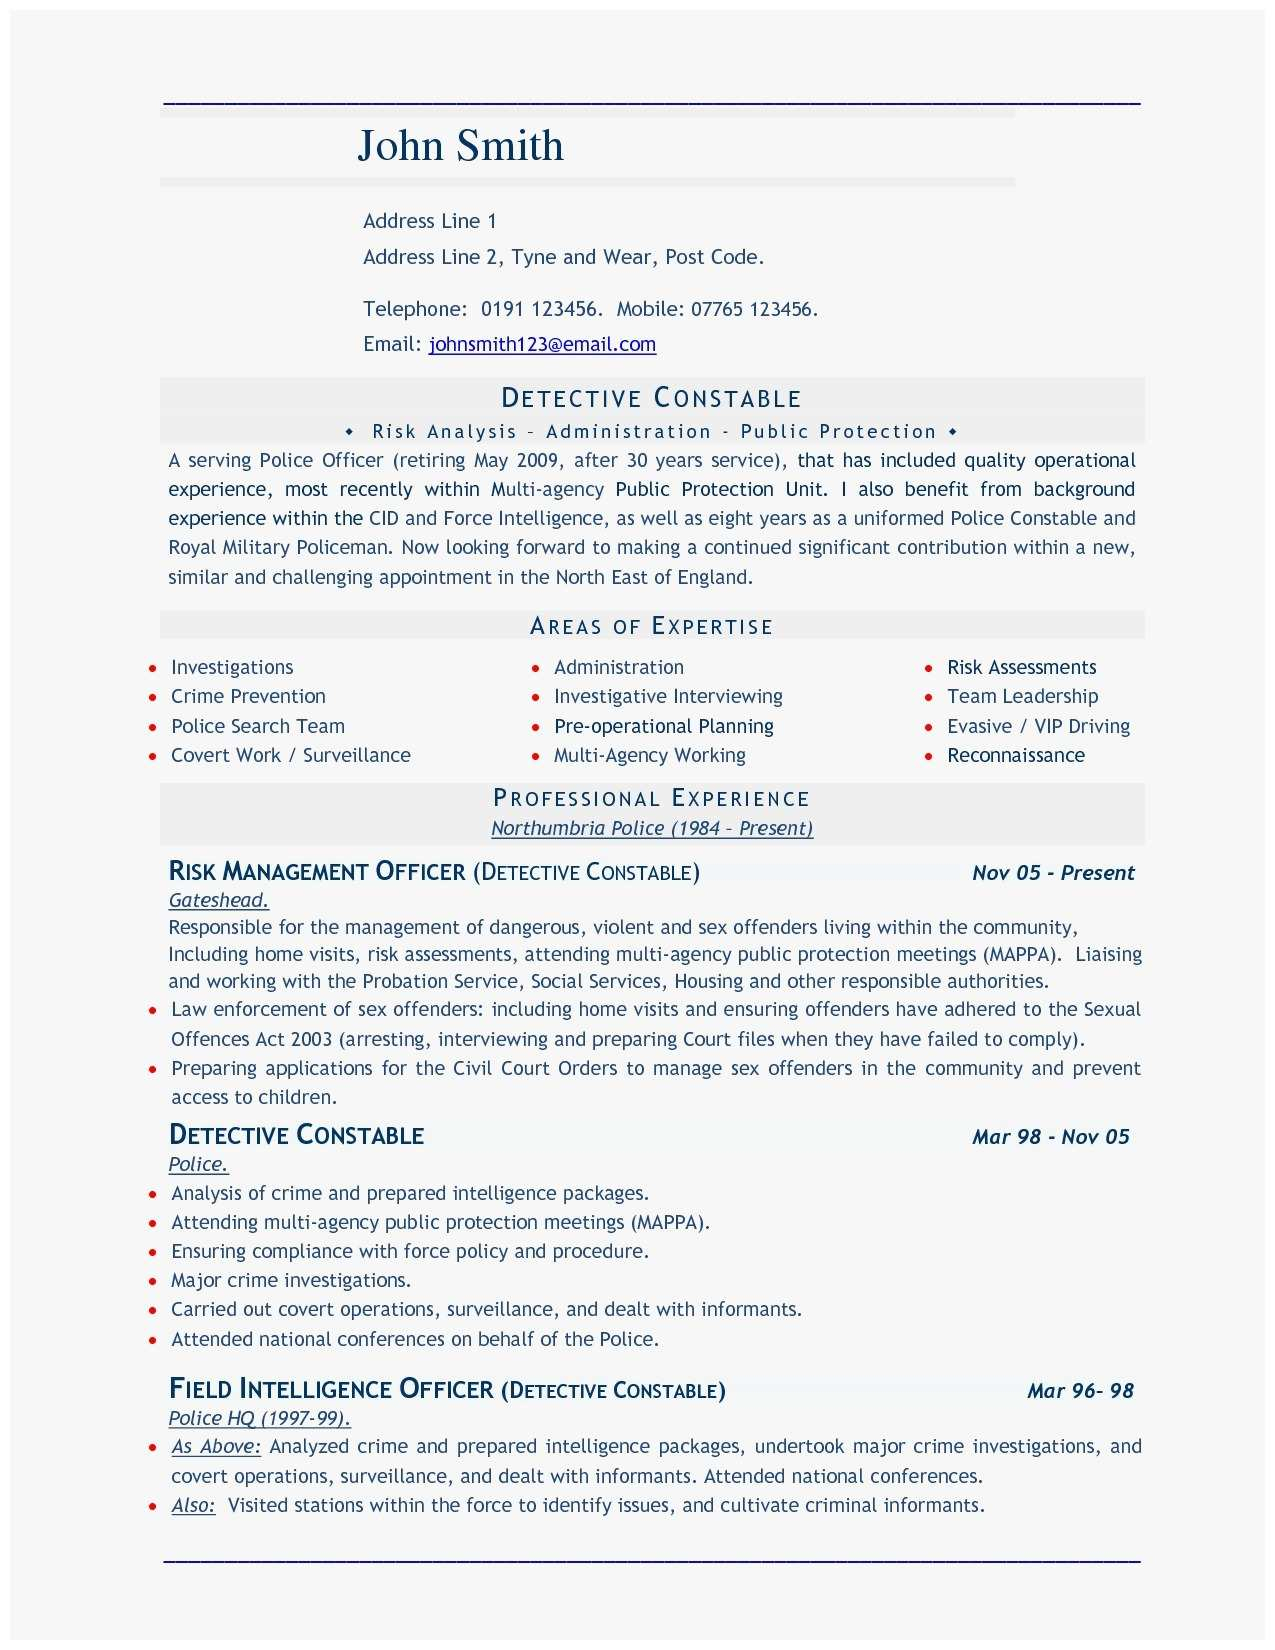 Resume Templates Word 2010 Fabulous Cv Format In Ms Word Regarding Resume Templates Word 2010